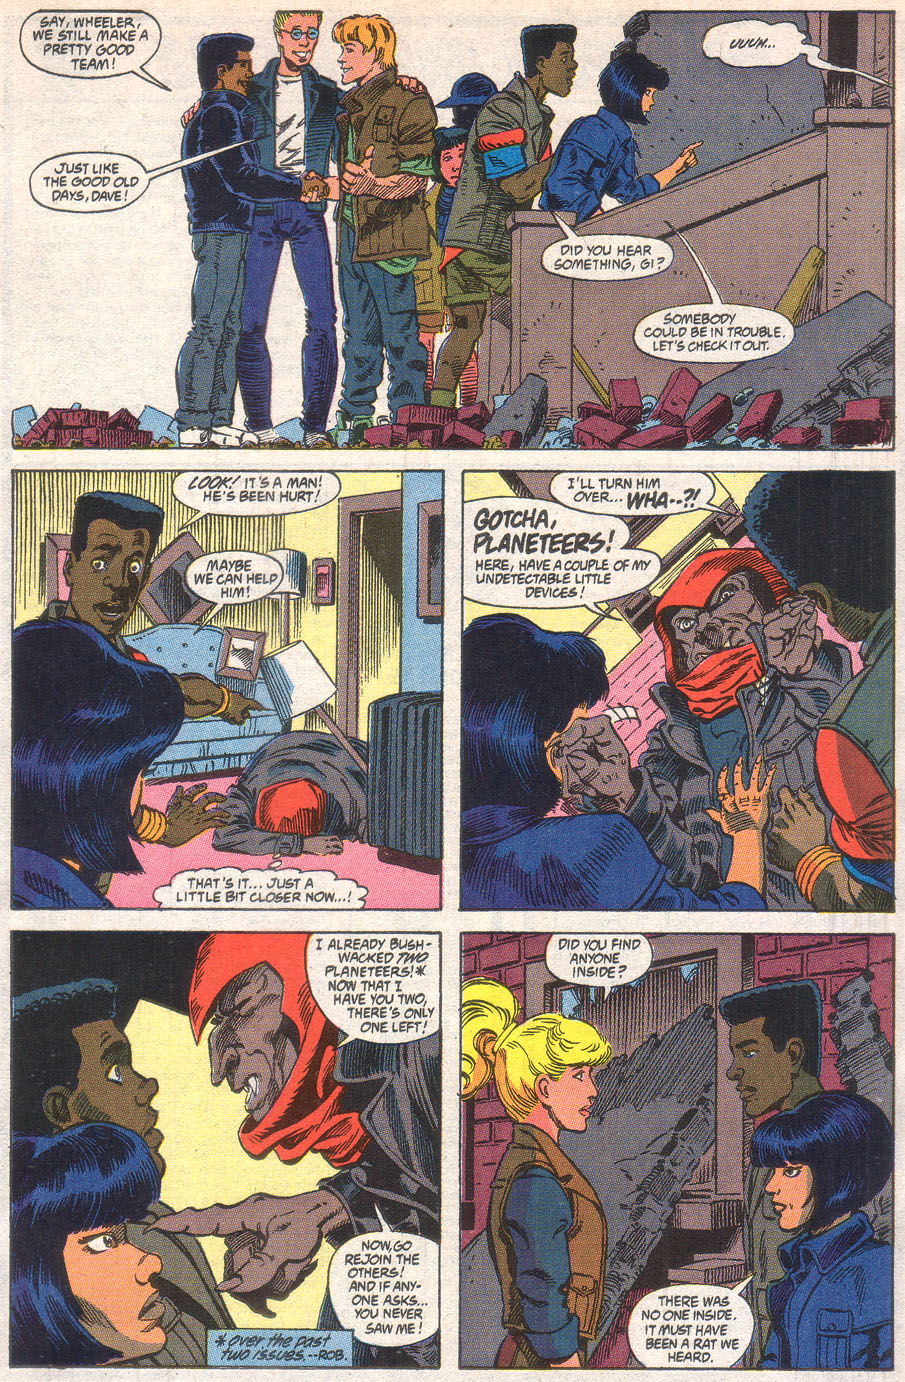 Captain Planet and the Planeteers 4 Page 26